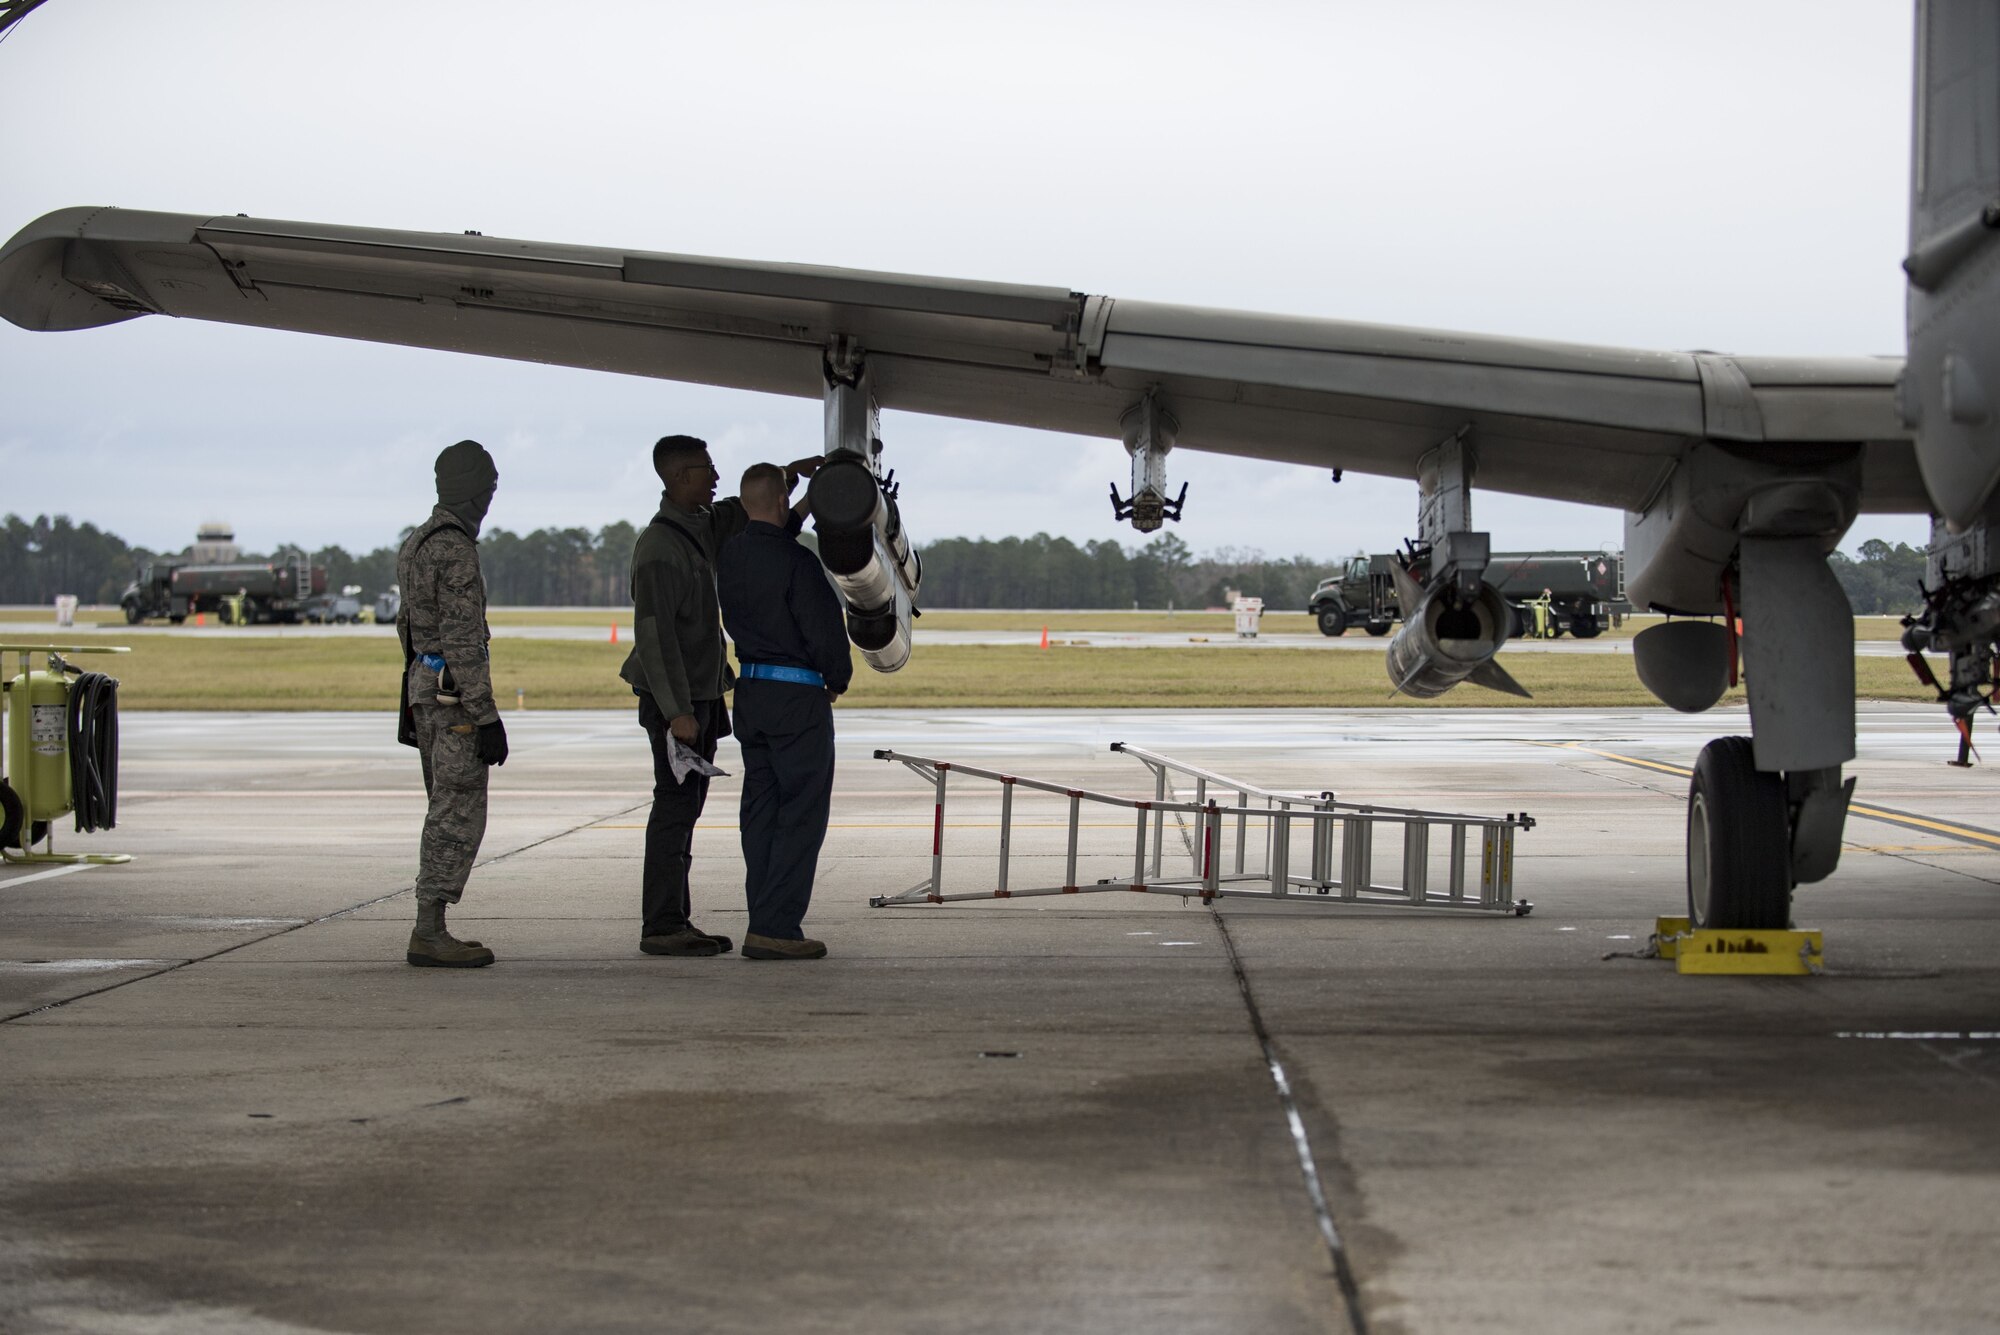 Airmen from the 23d Maintenance Group perform a thru flight inspection on an A-10C Thunderbolt II, Dec. 7, 2017, at Moody Air Force Base, Ga. Moody recently participated in a week-long, Phase 1, Phase 2 exercise designed to demonstrate the 23d Wing’s ability to meet combatant commander objectives. The exercise tested pilots’ and maintainers’ ability to launch around-the-clock sorties at an accelerated rate during surge operations. (U.S. Air Force photo by Andrea Jenkins)